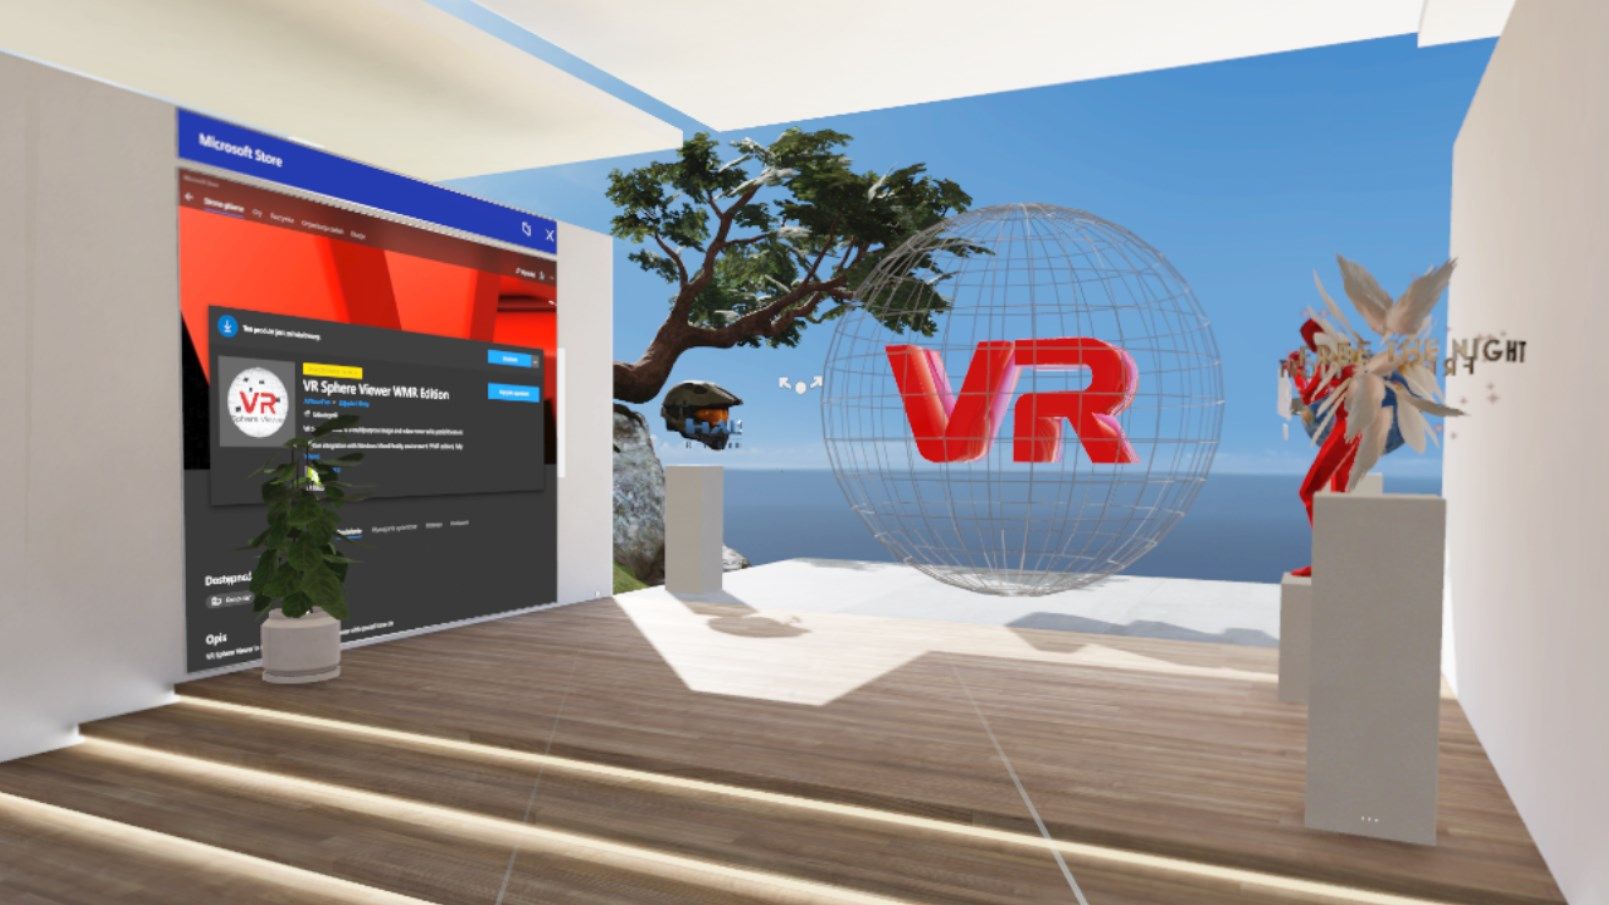 Mixed Reality launcher ready to immerse into VR viewing!